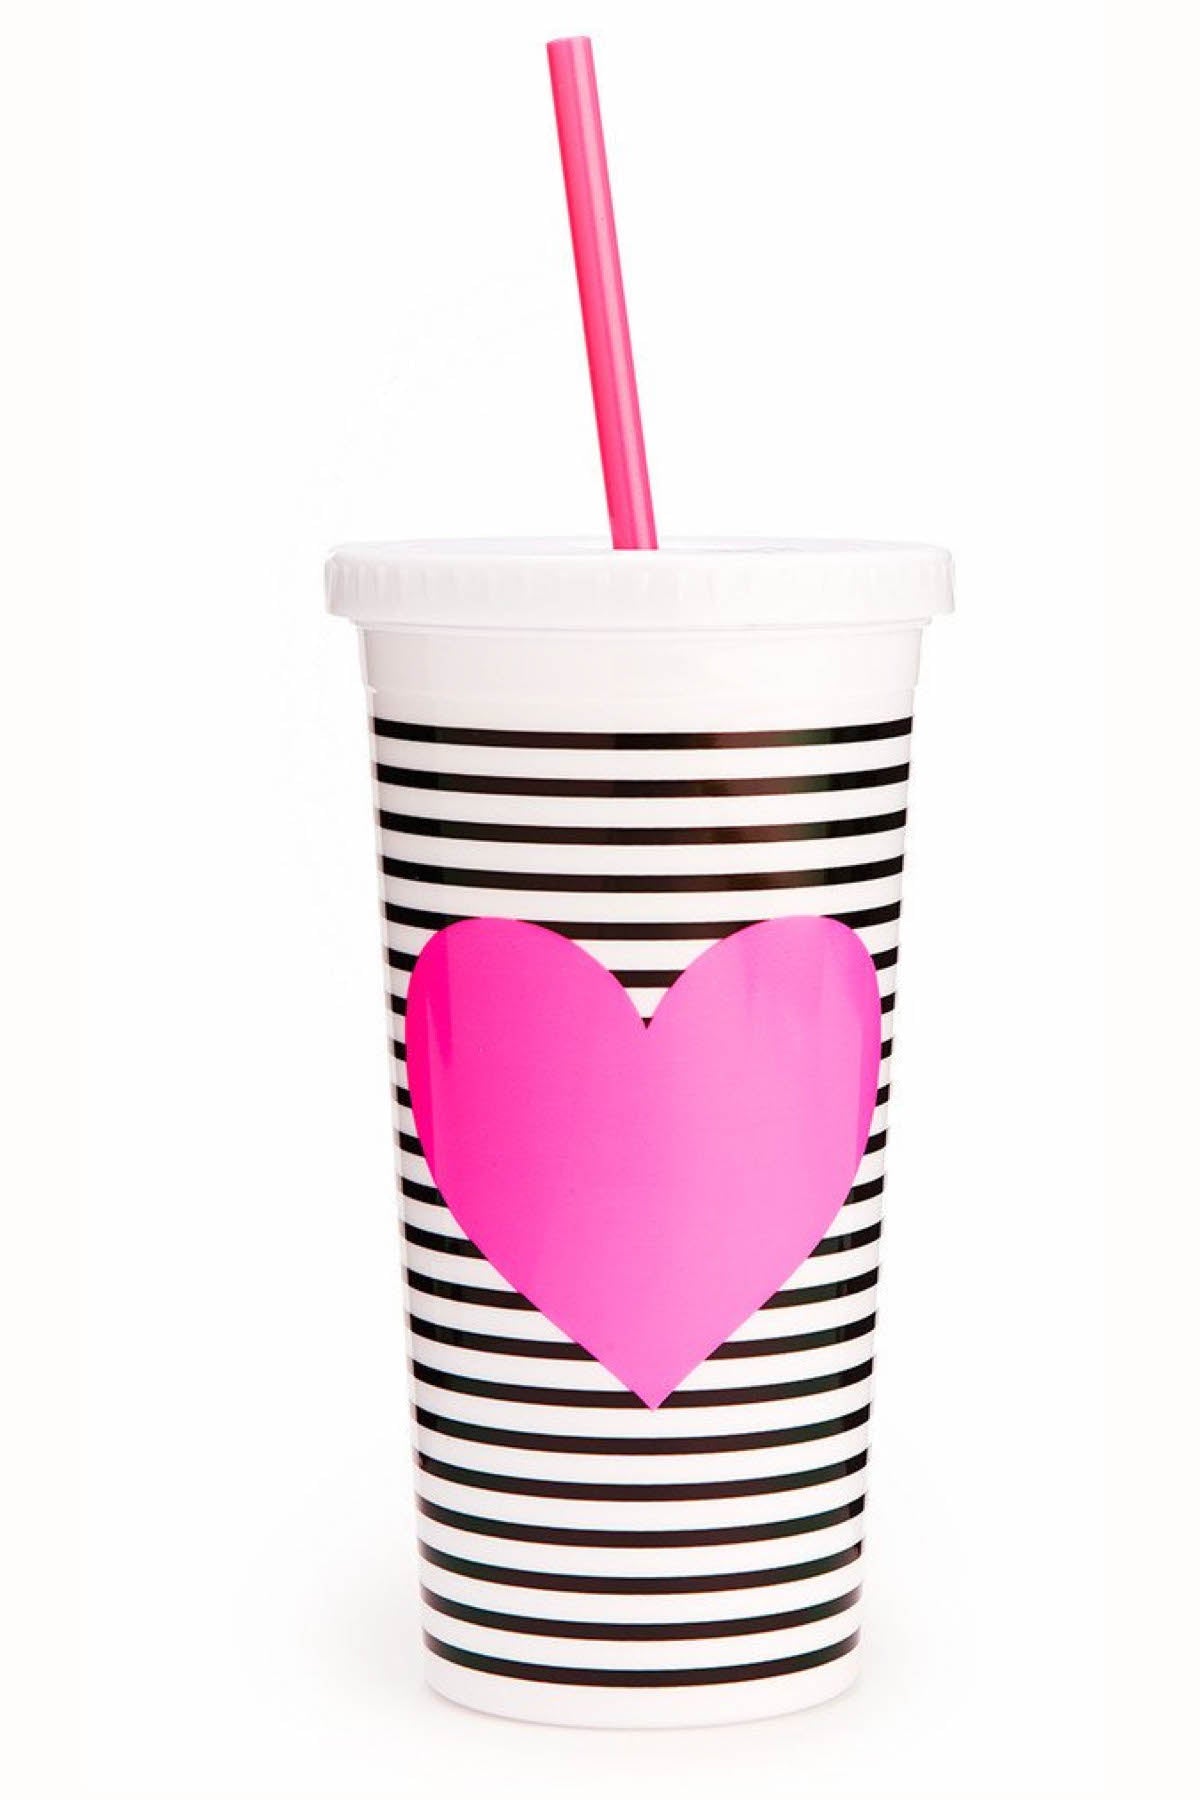 Ban.do Striped Heart Tumbler WITHOUT Straw